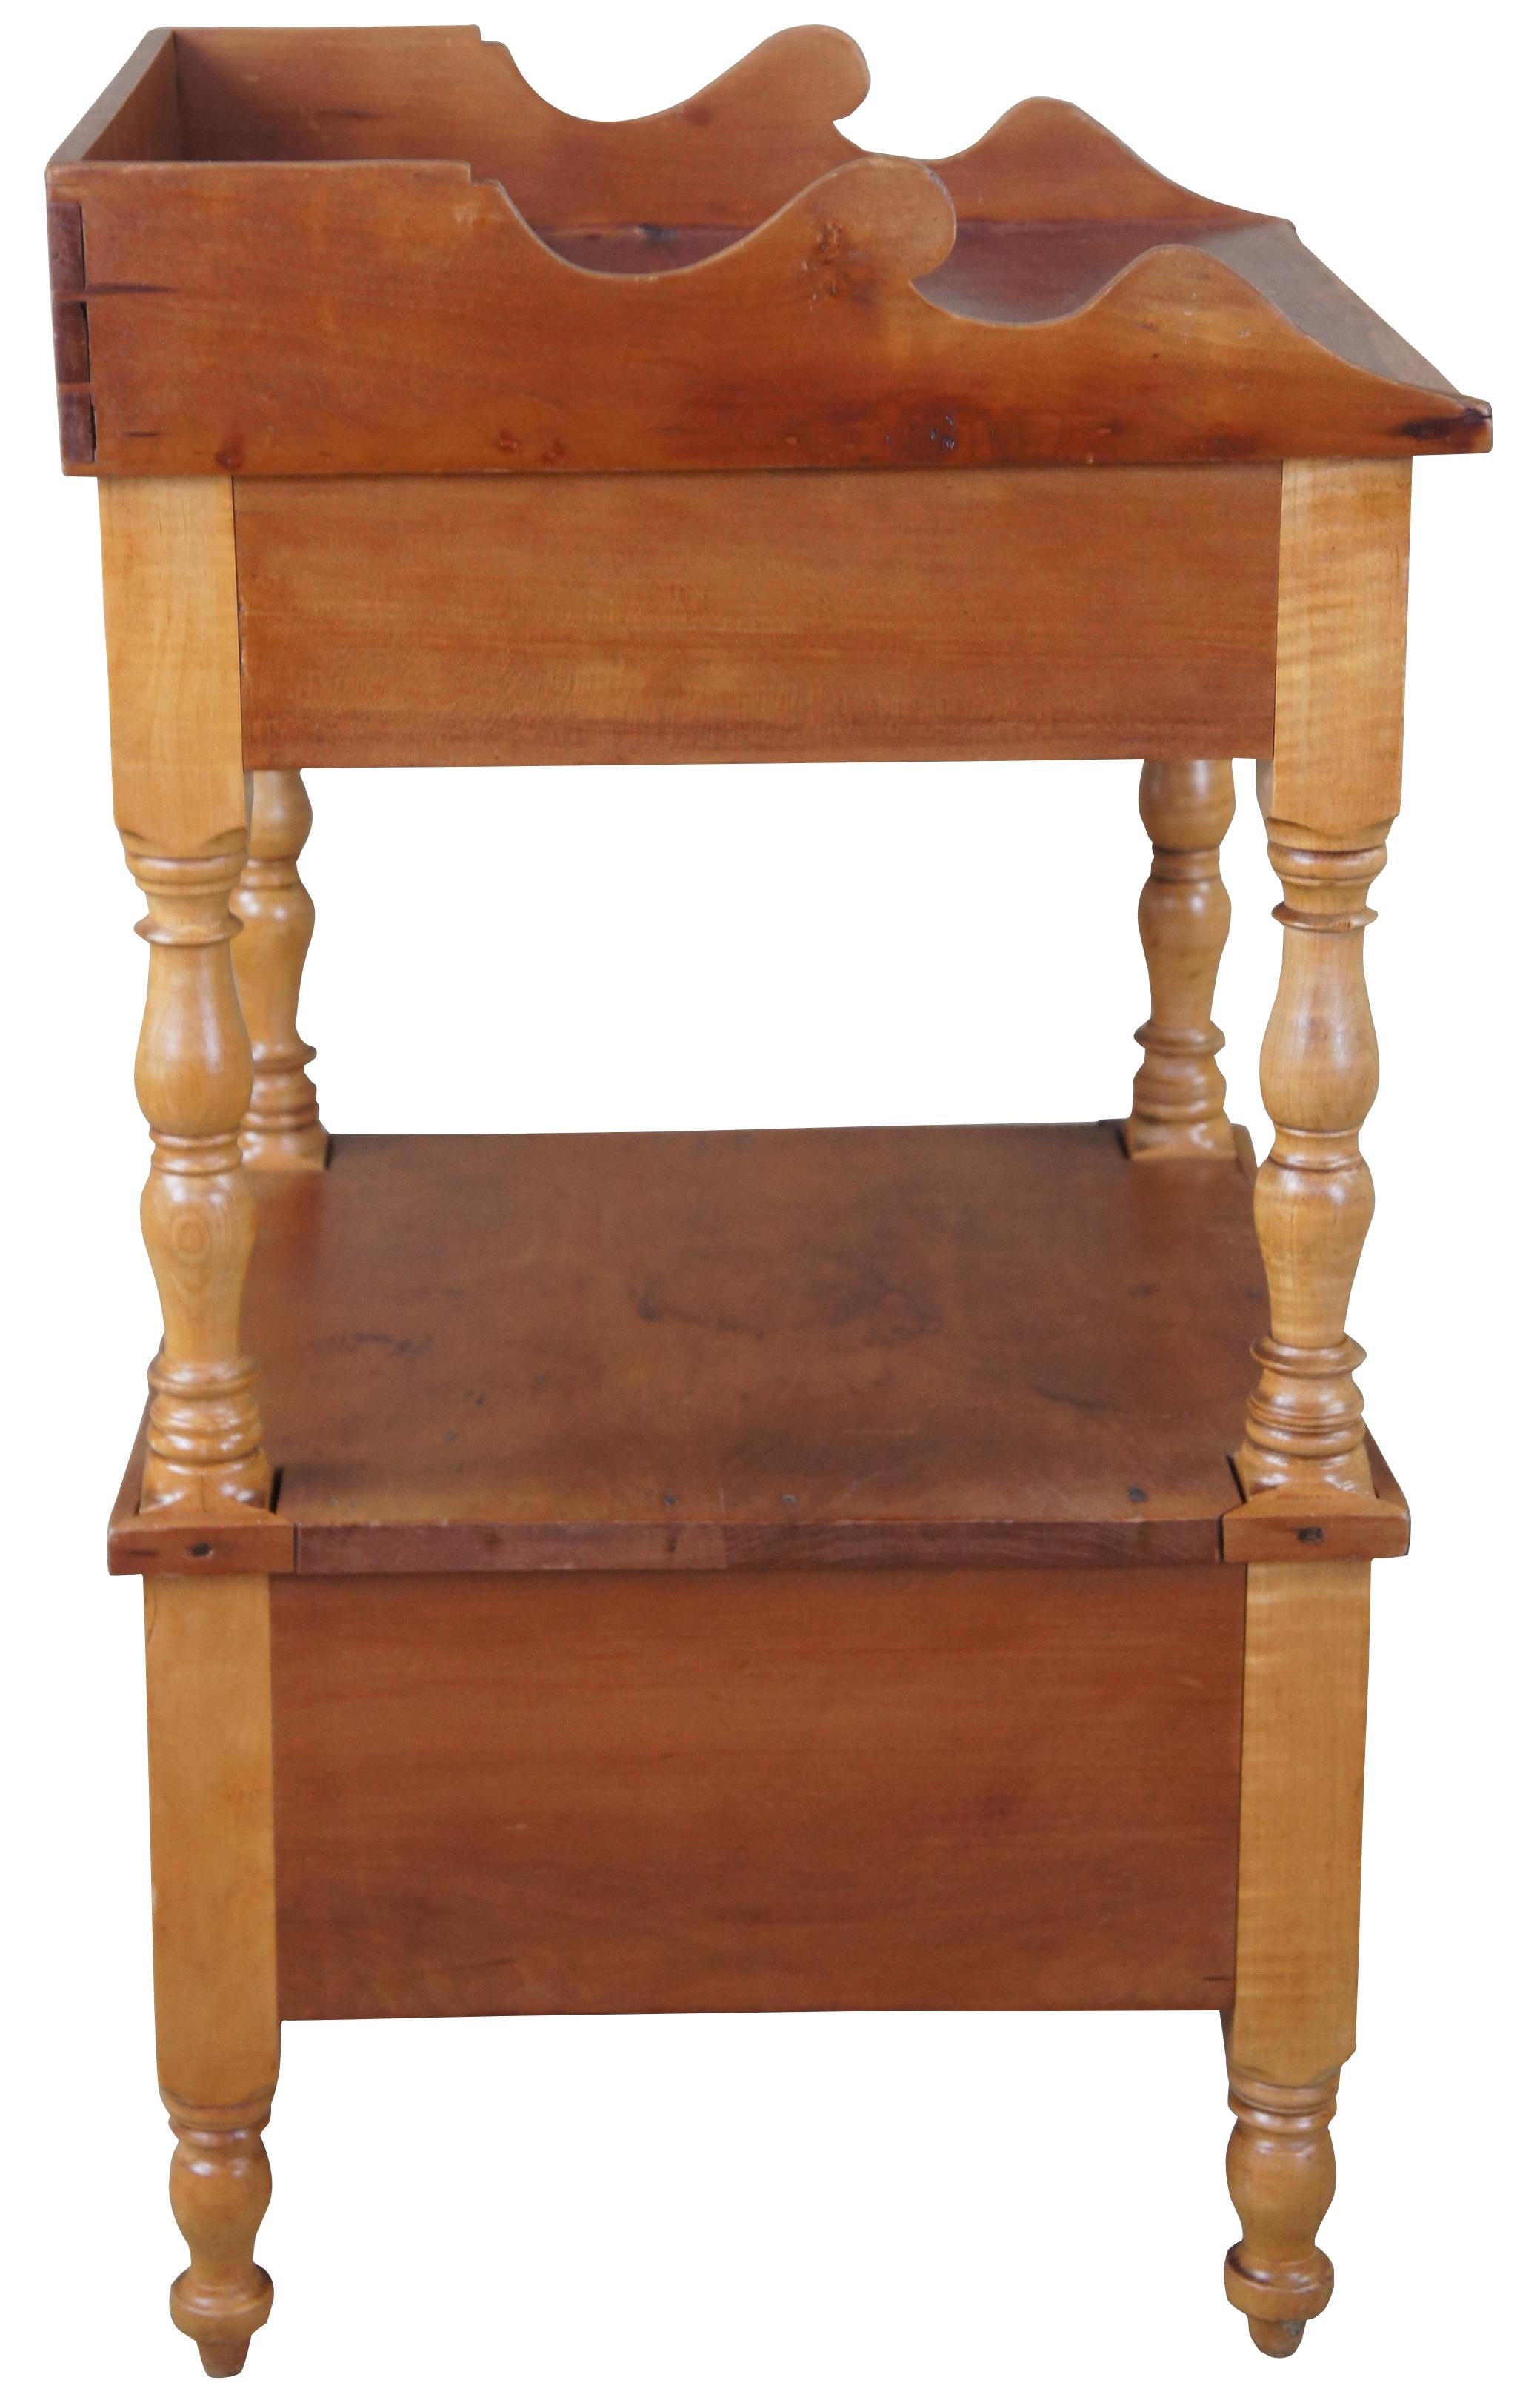 early american maple furniture